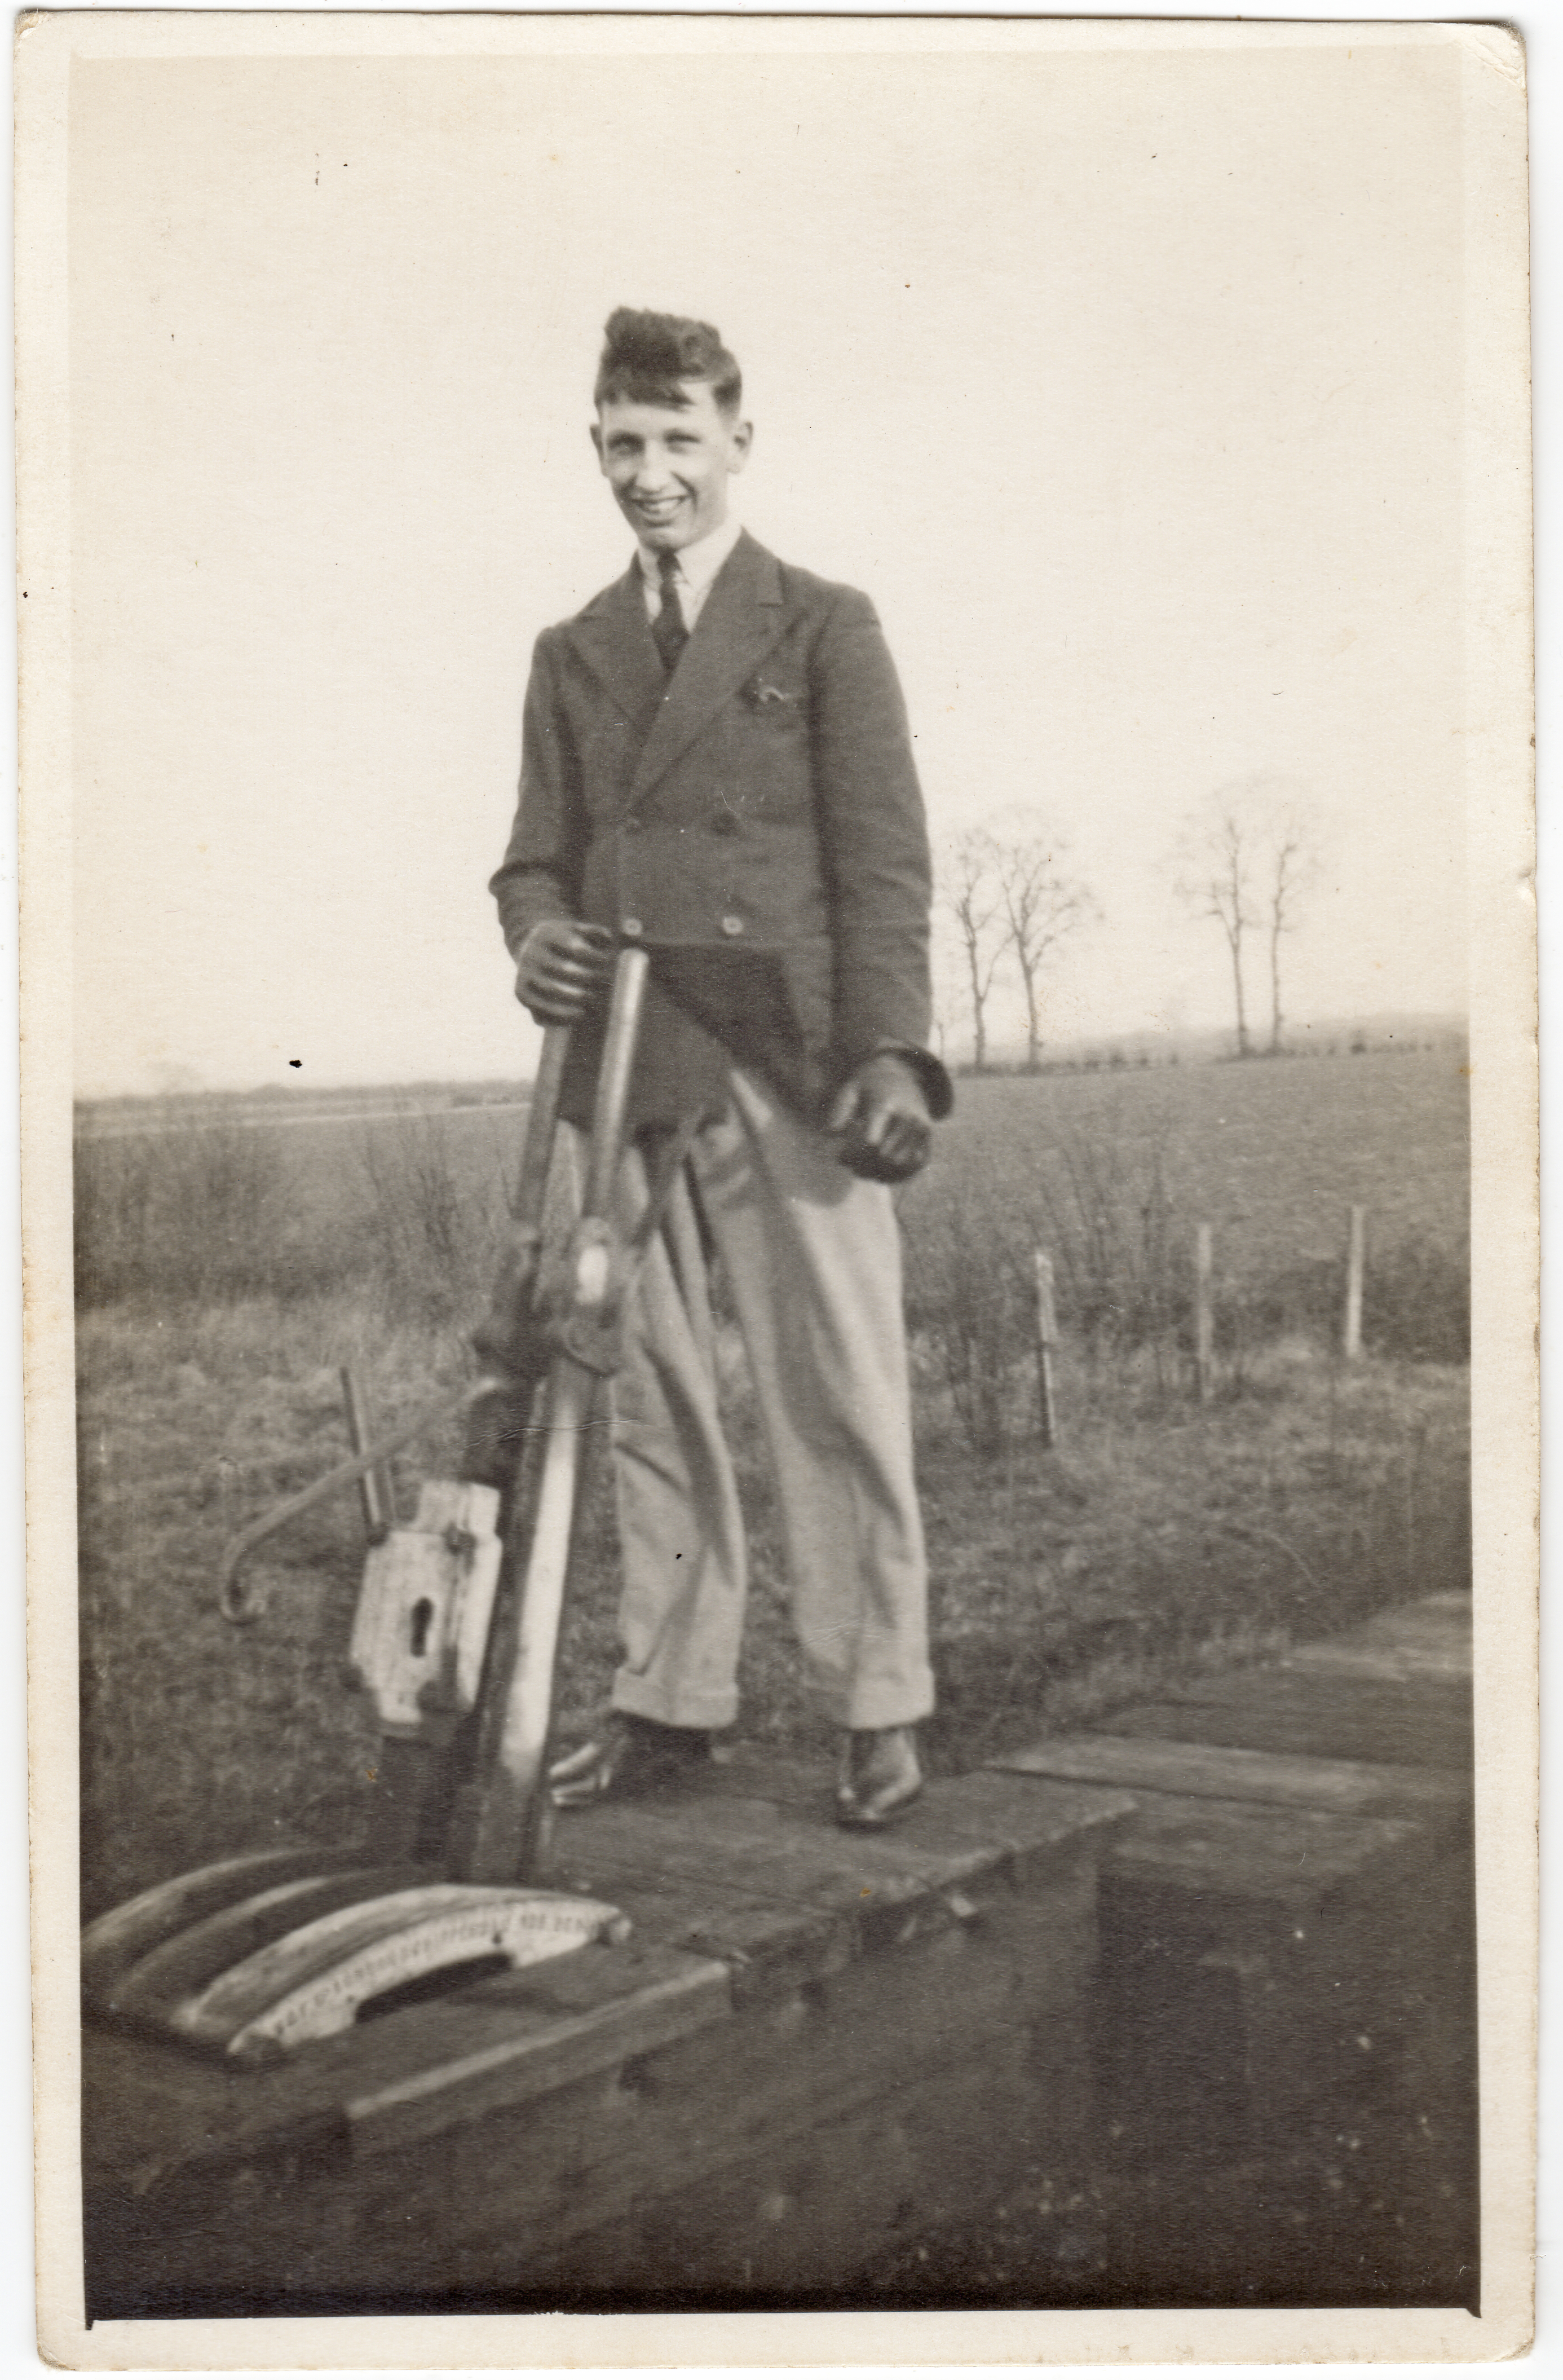  Edgar Reynolds working on the railway ?  Photograph donated by Pat Milgate  OJR_273